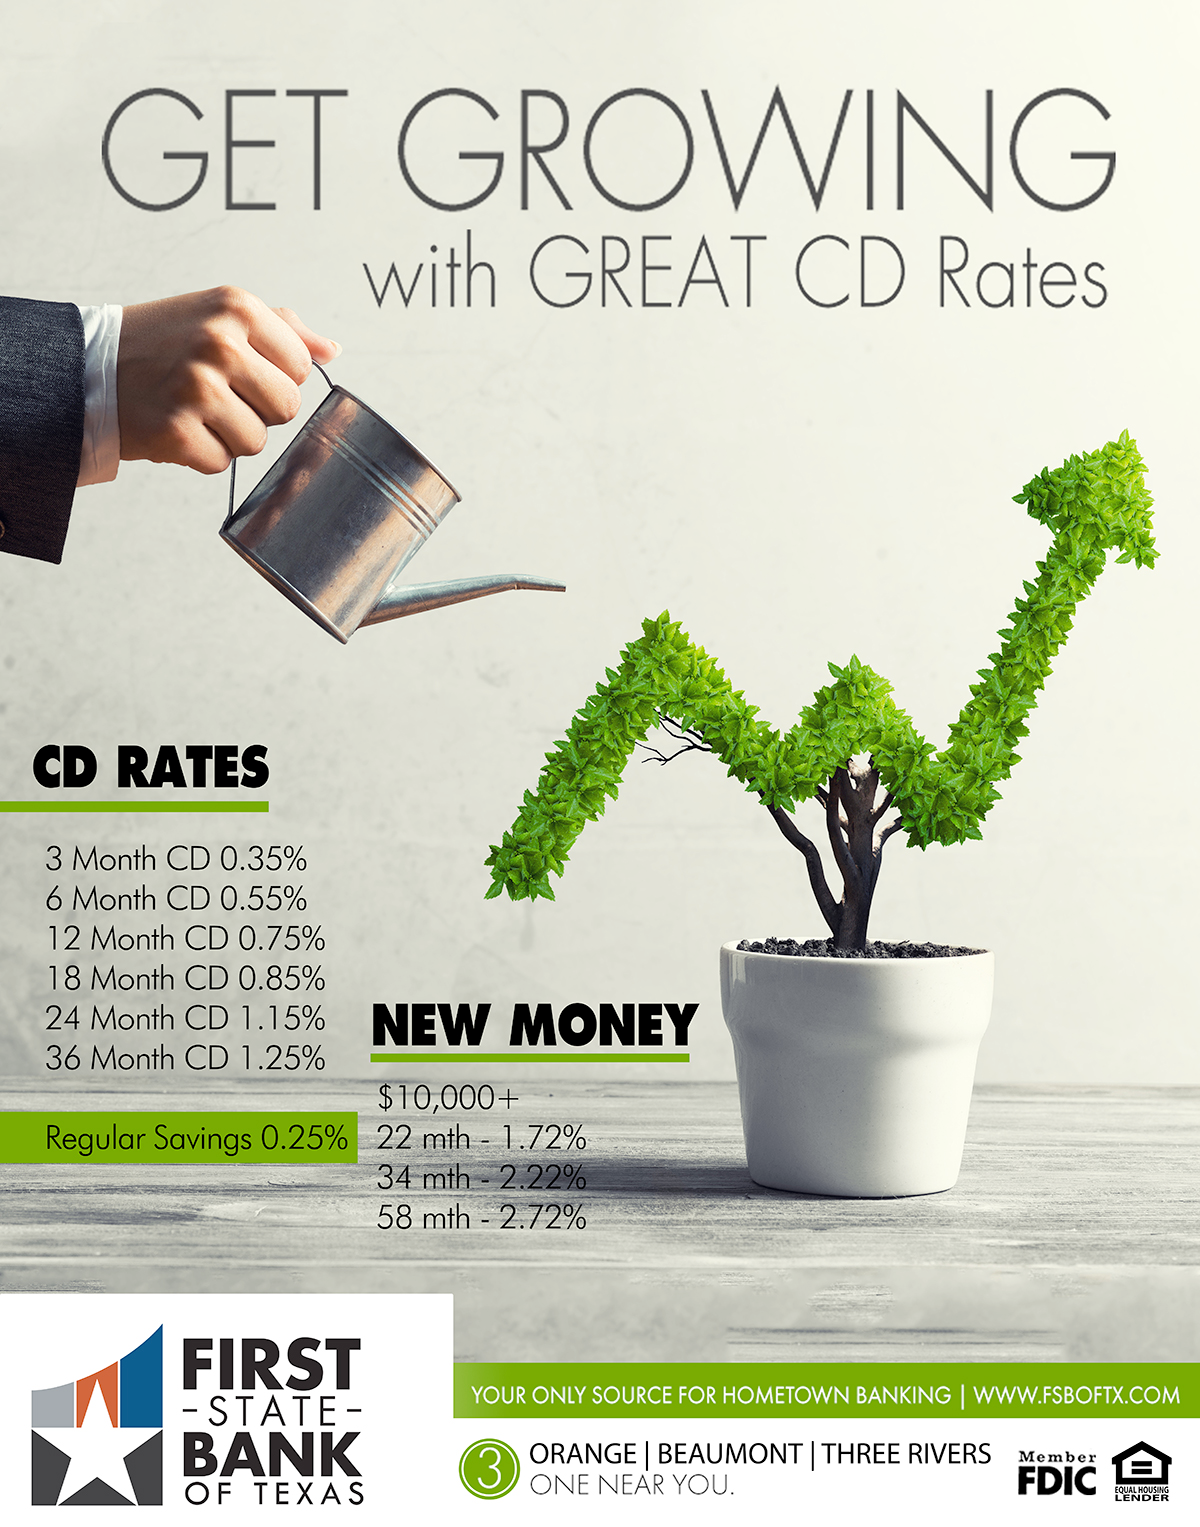 CD RATES First State Bank